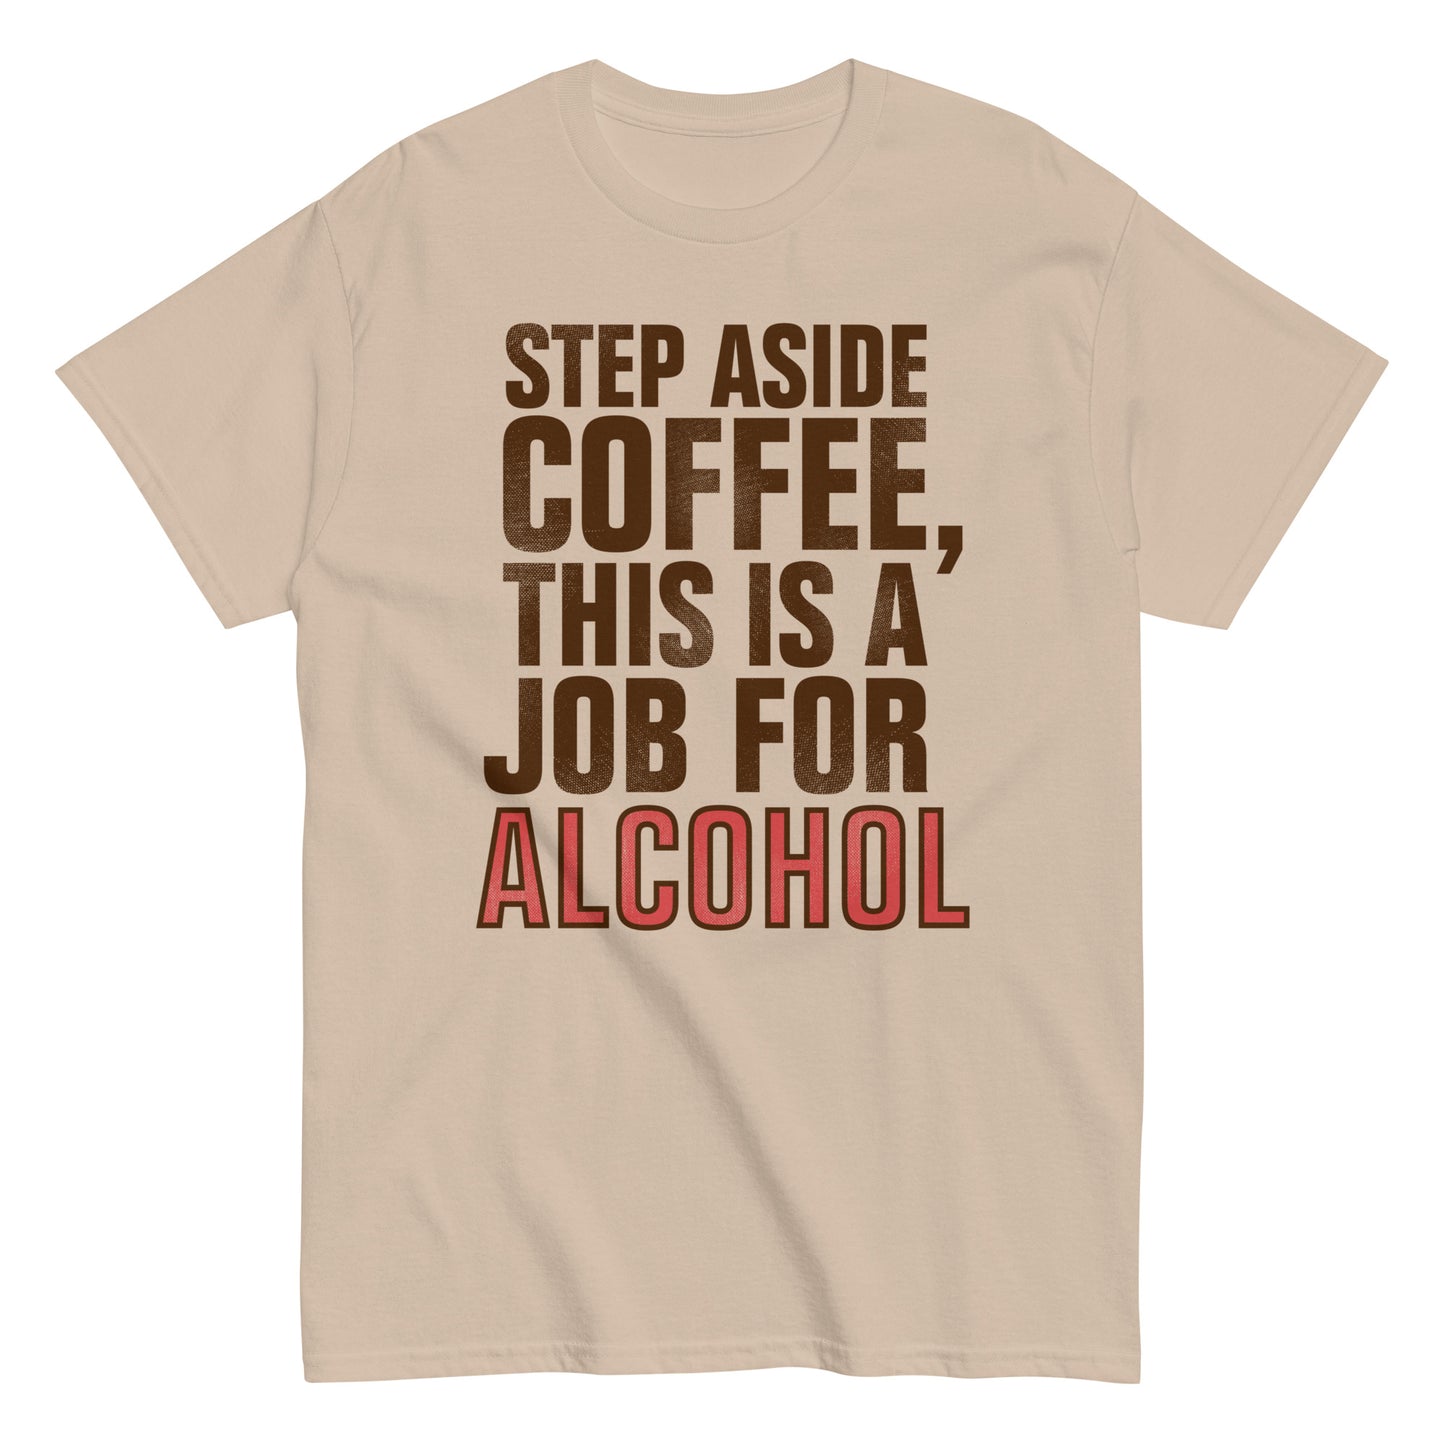 Step Aside Coffee, This Is A Job For Alcohol Men's Classic Tee